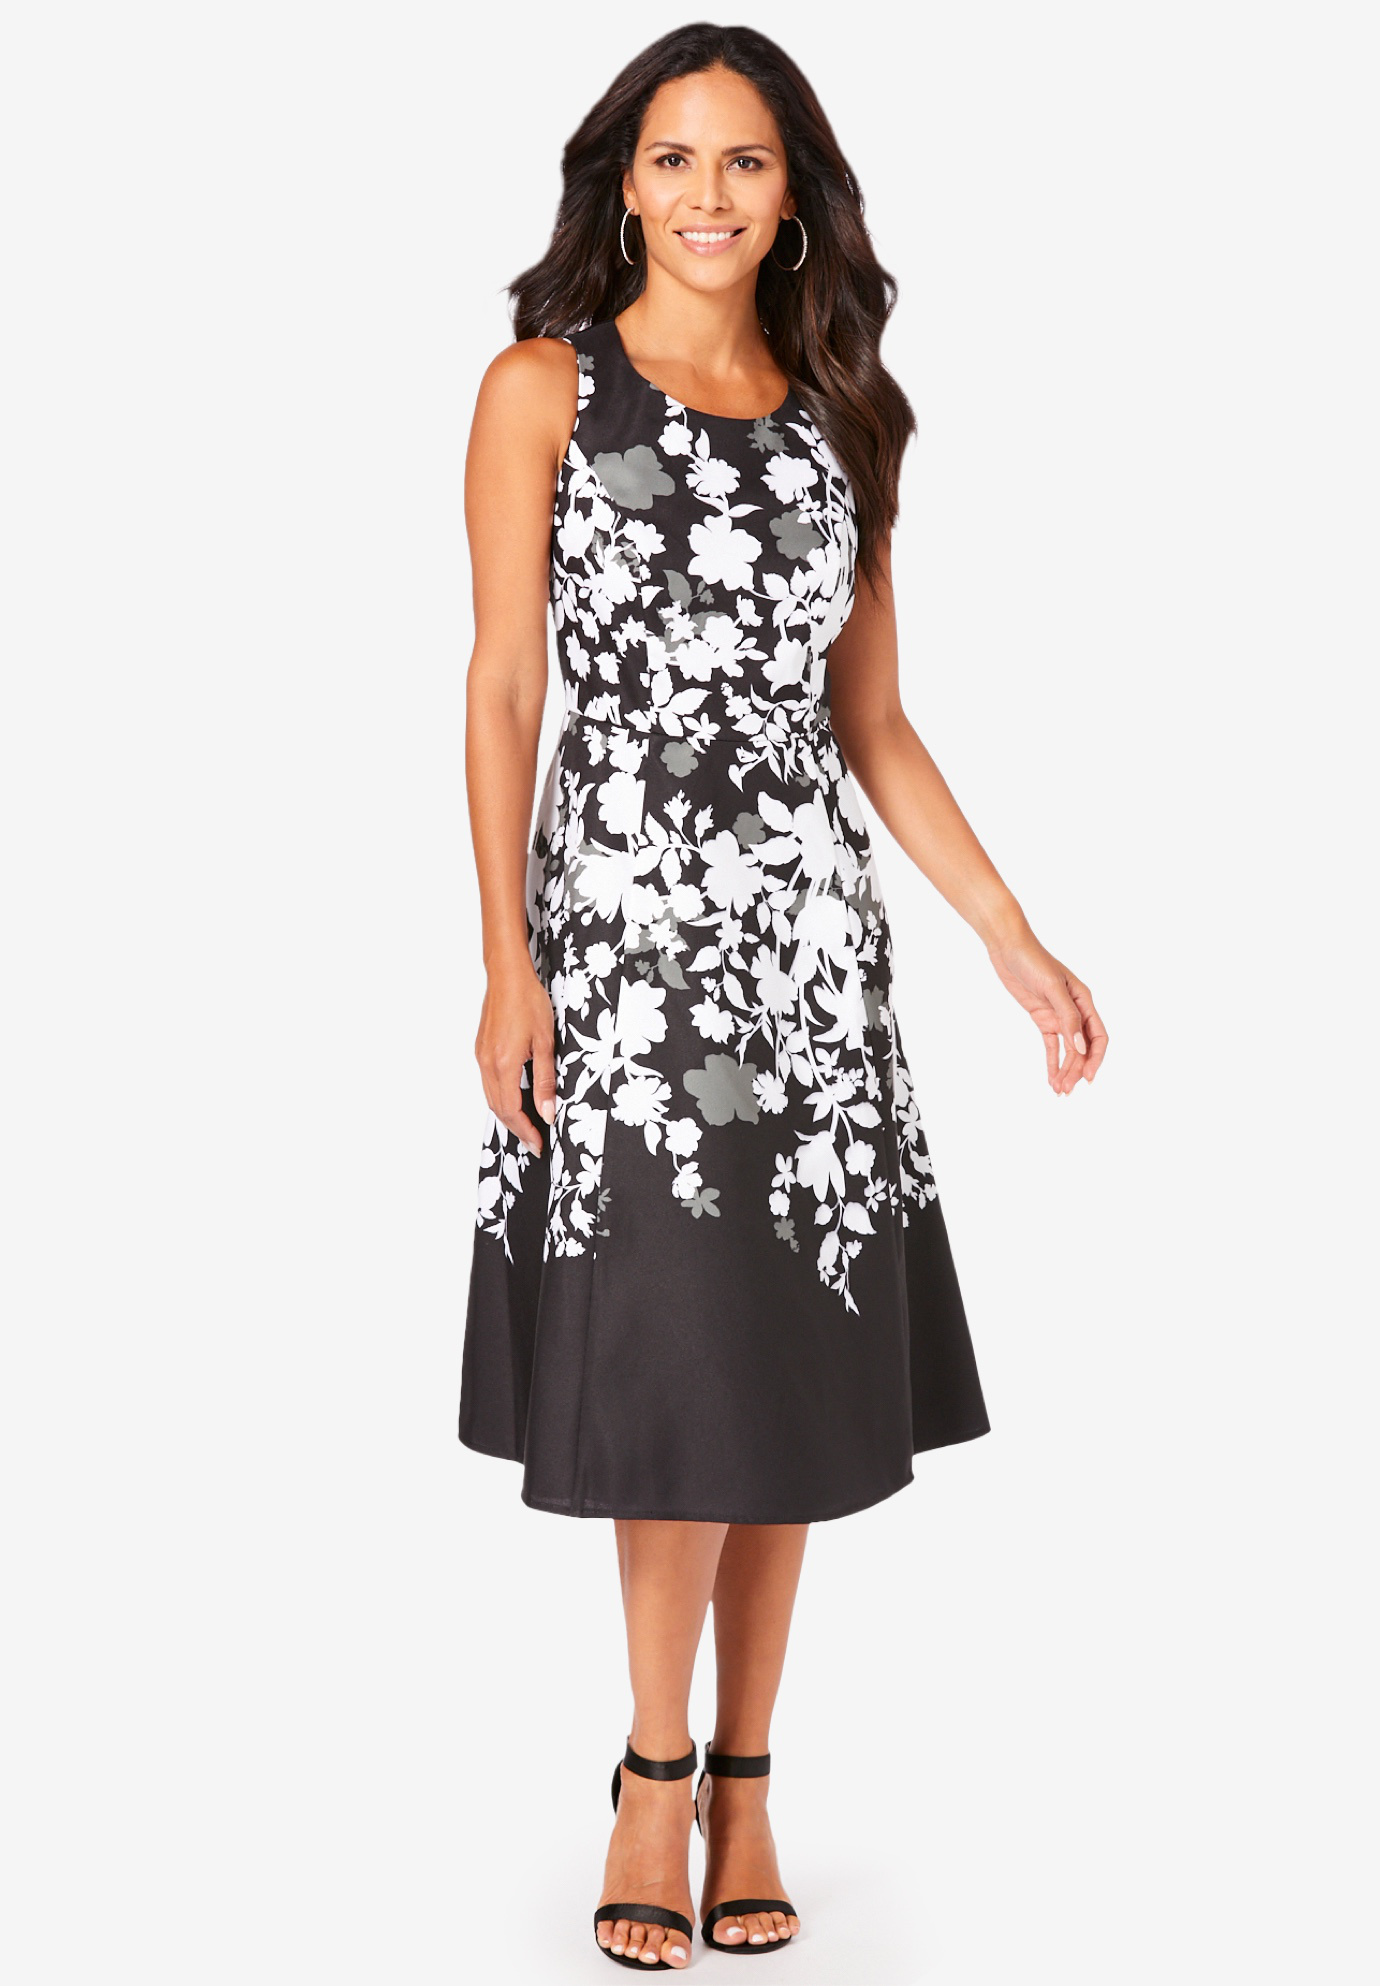 Fit-And-Flare Dress | Roaman's